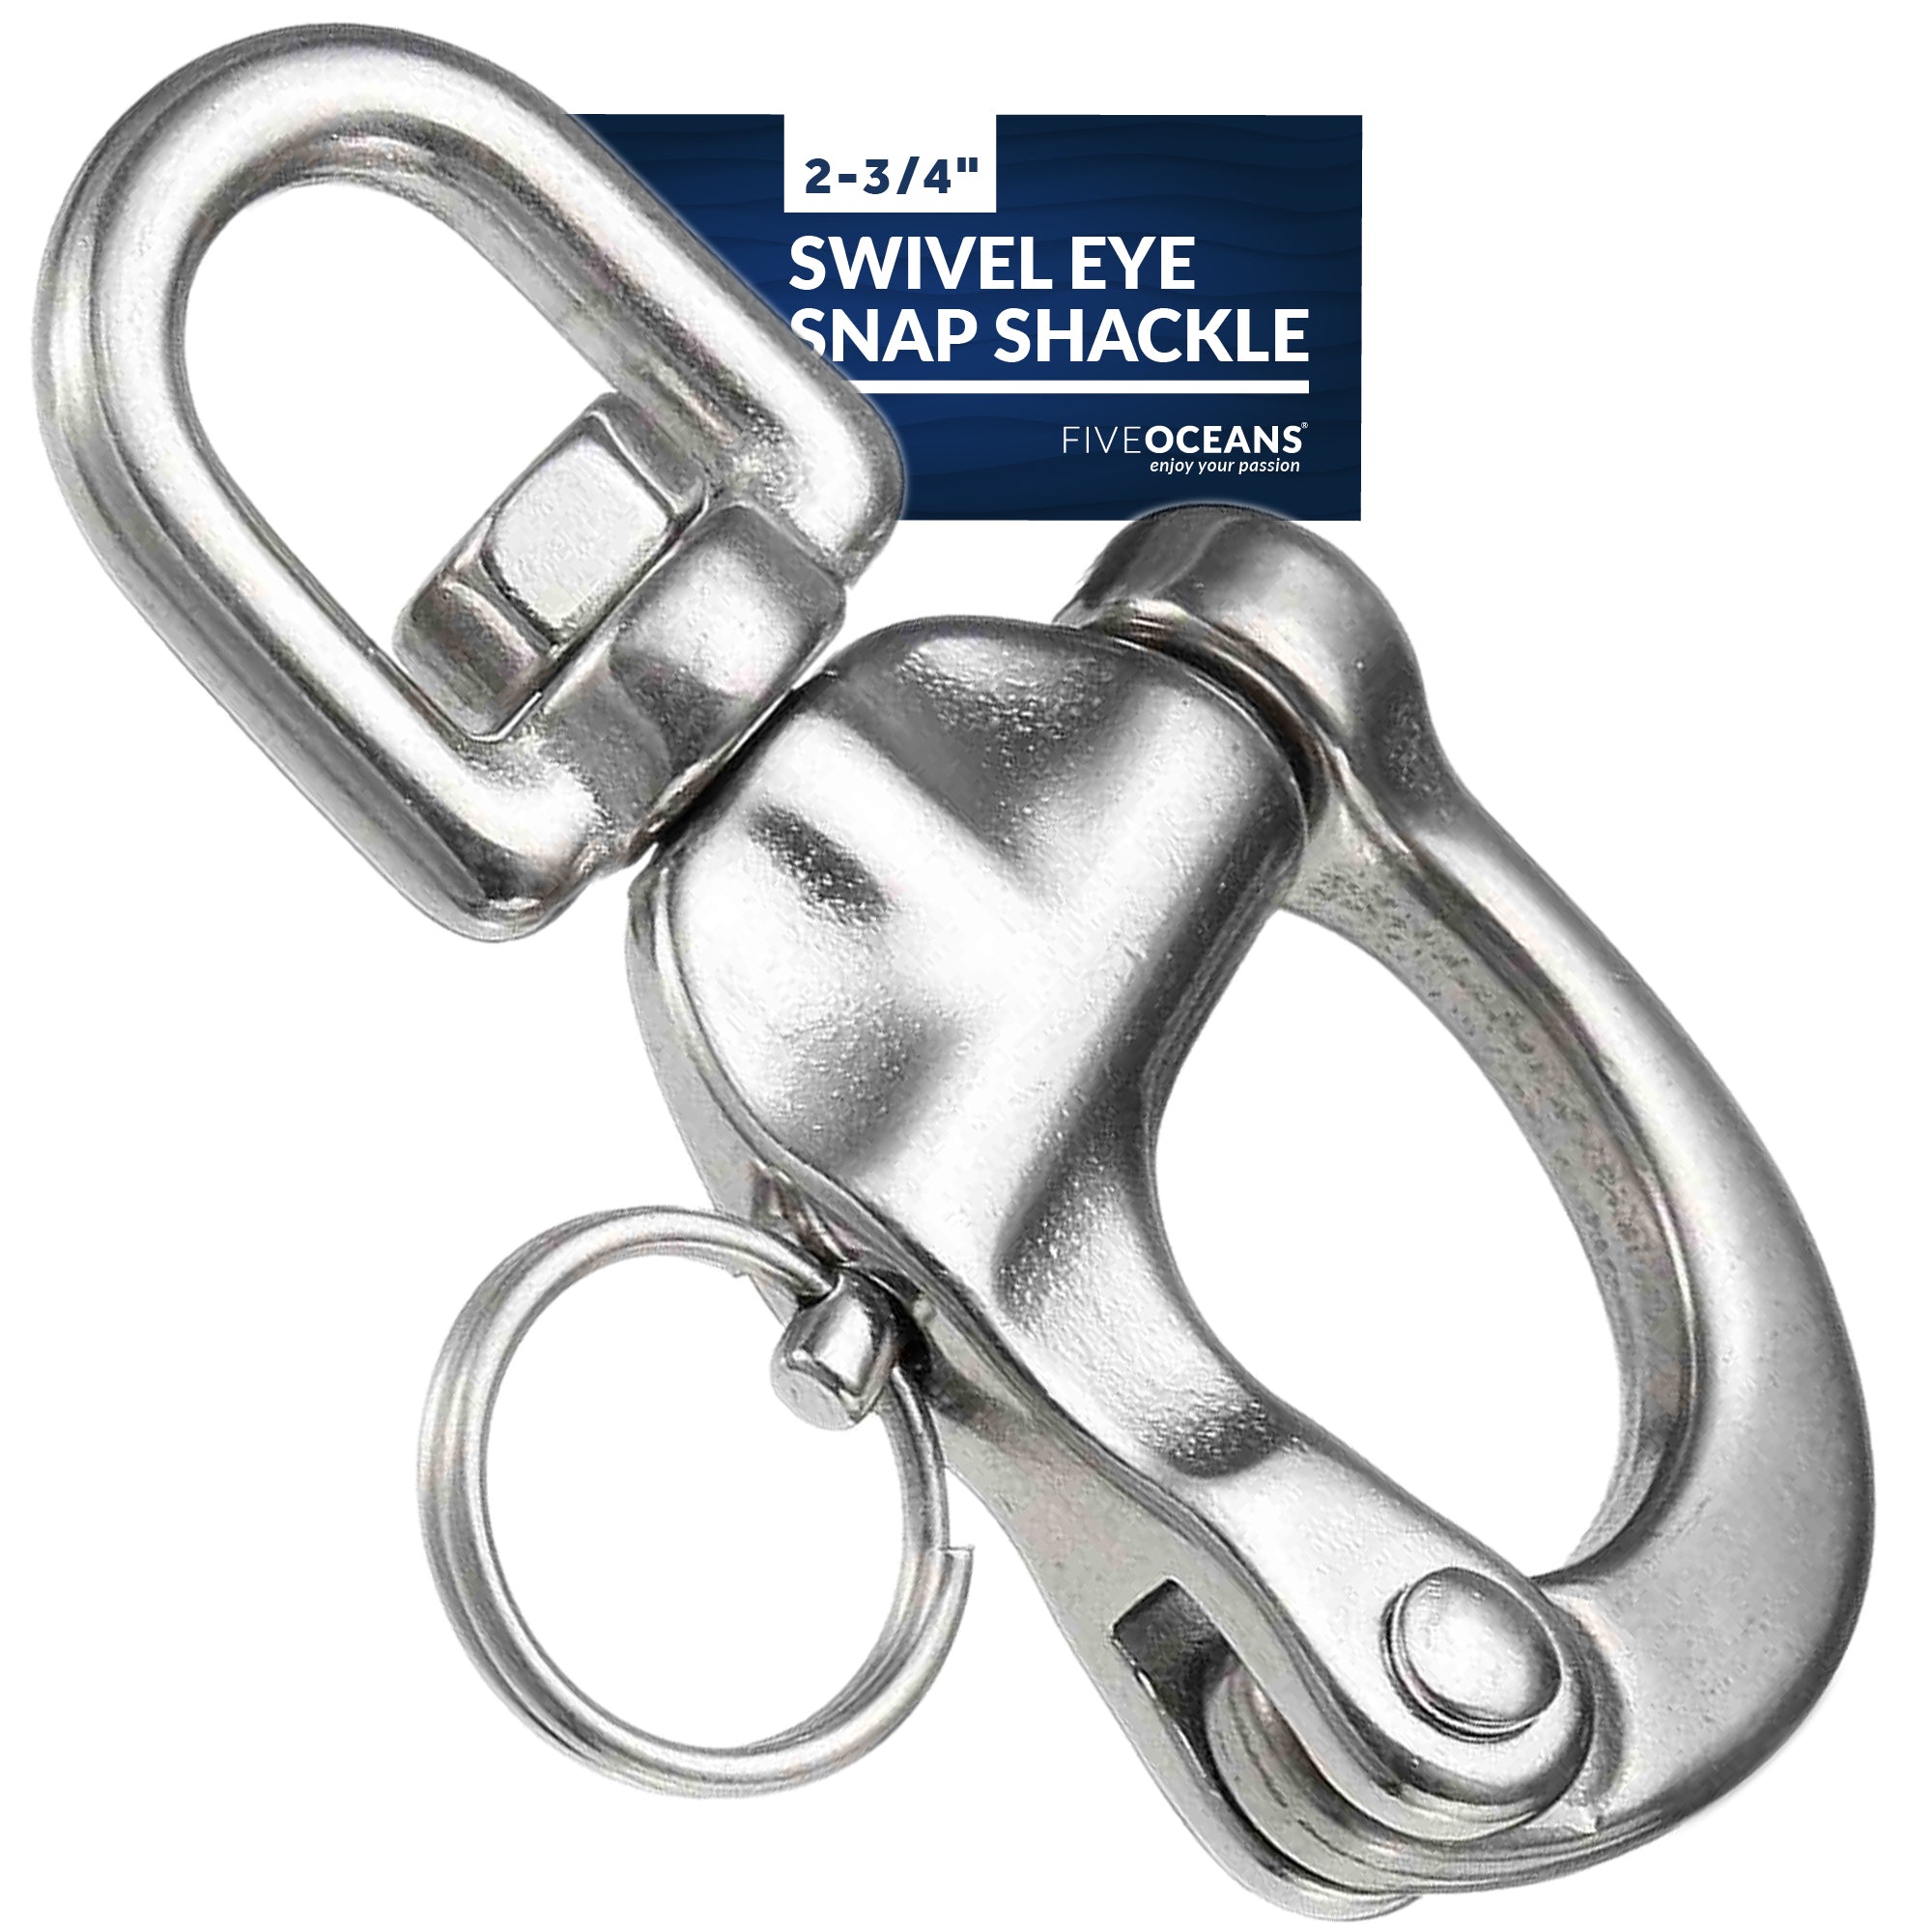 Swivel Eye Snap Shackle Quick Release Bail Rigging, 2 3/4 Stainless S